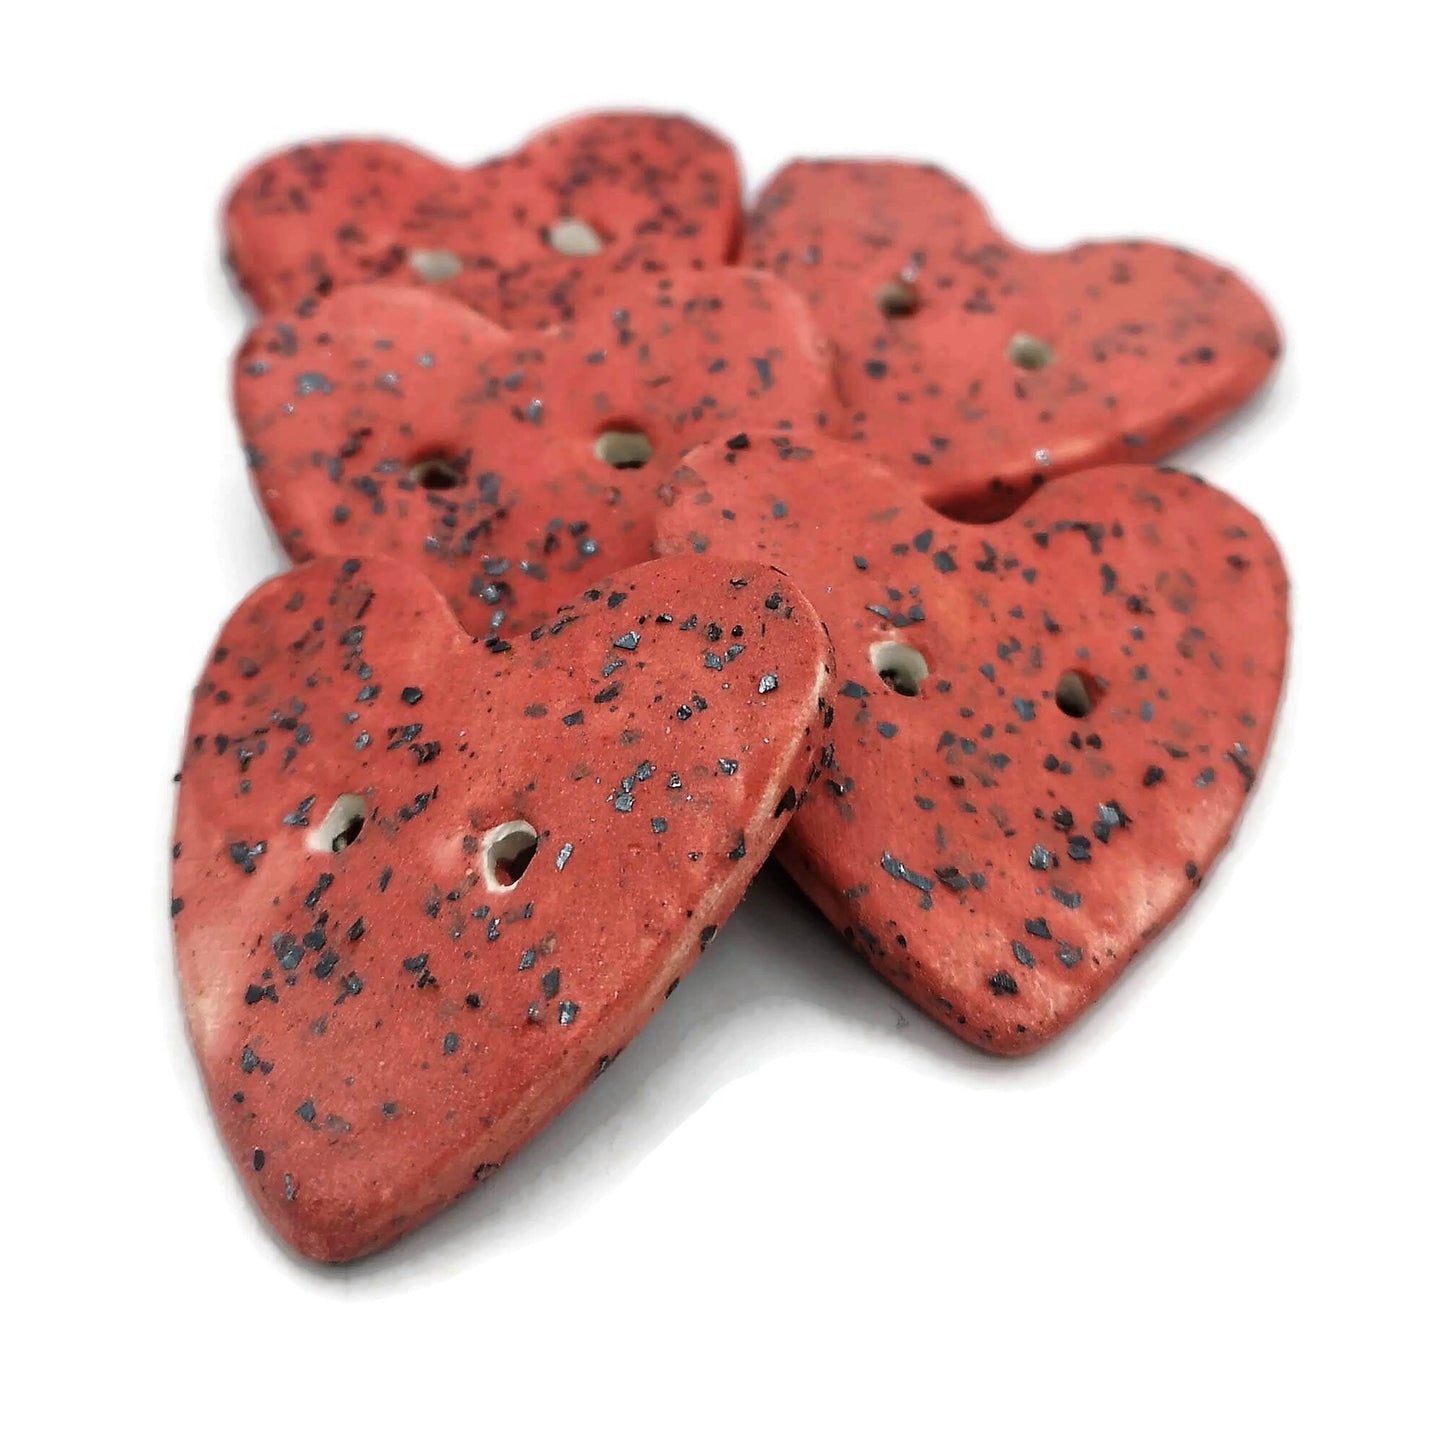 HEART BUTTON, NOVELTY Theme Buttons For Crafts, Unique Valentines Day Decor, Cute Handmade Ceramic Heart Shaped Buttons - Ceramica Ana Rafael